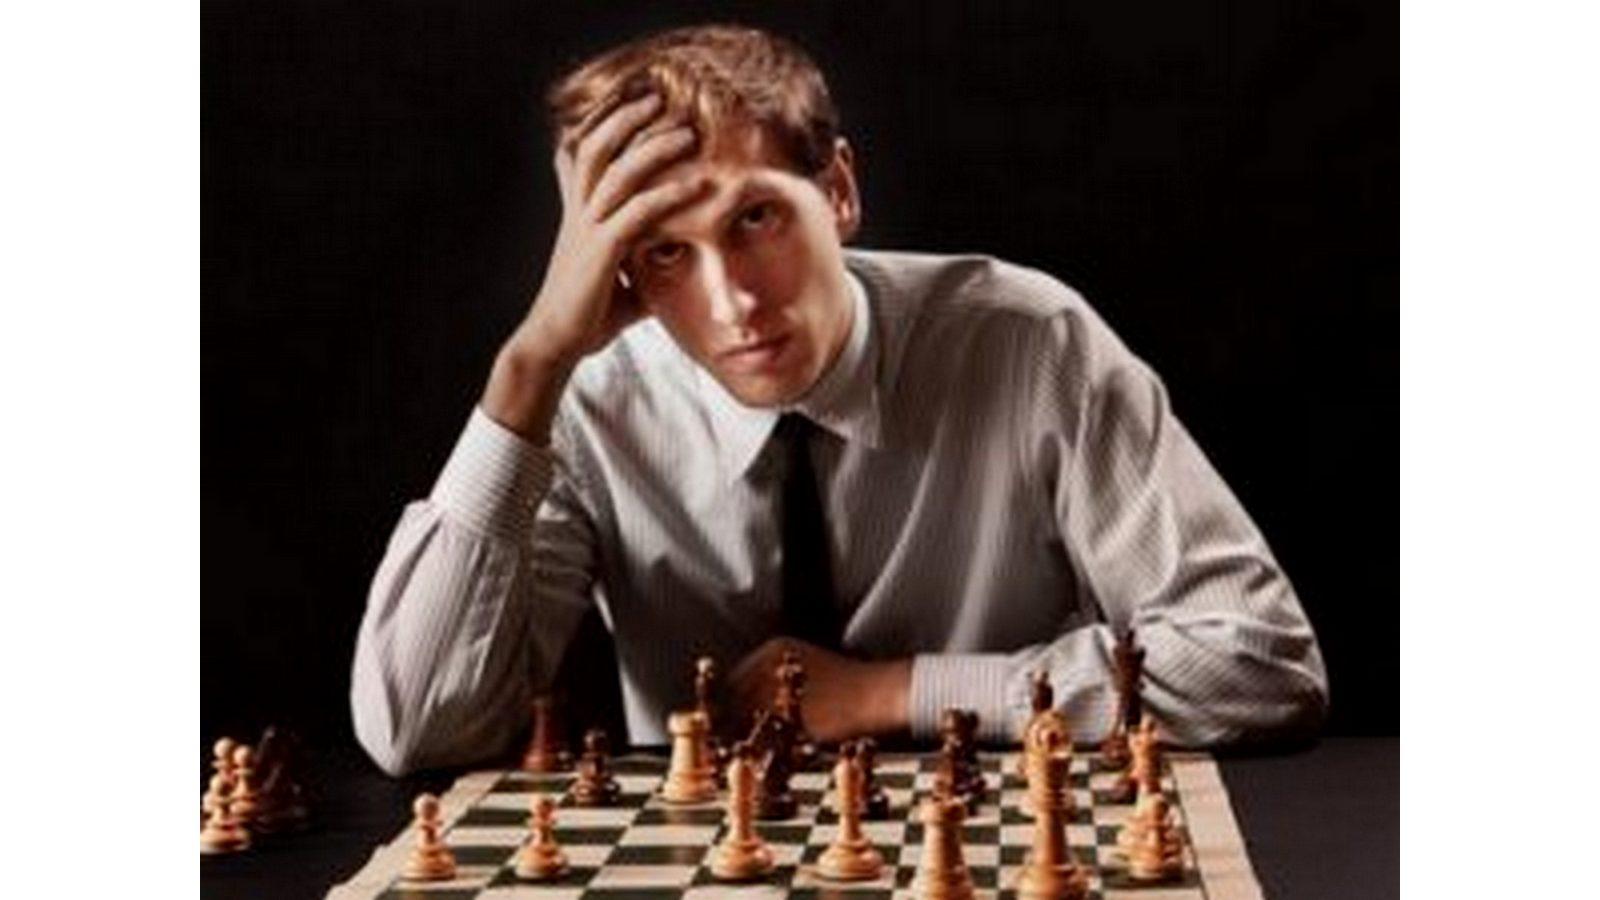 Bobby Fischer Teaches Chess, PDF, Chess Players